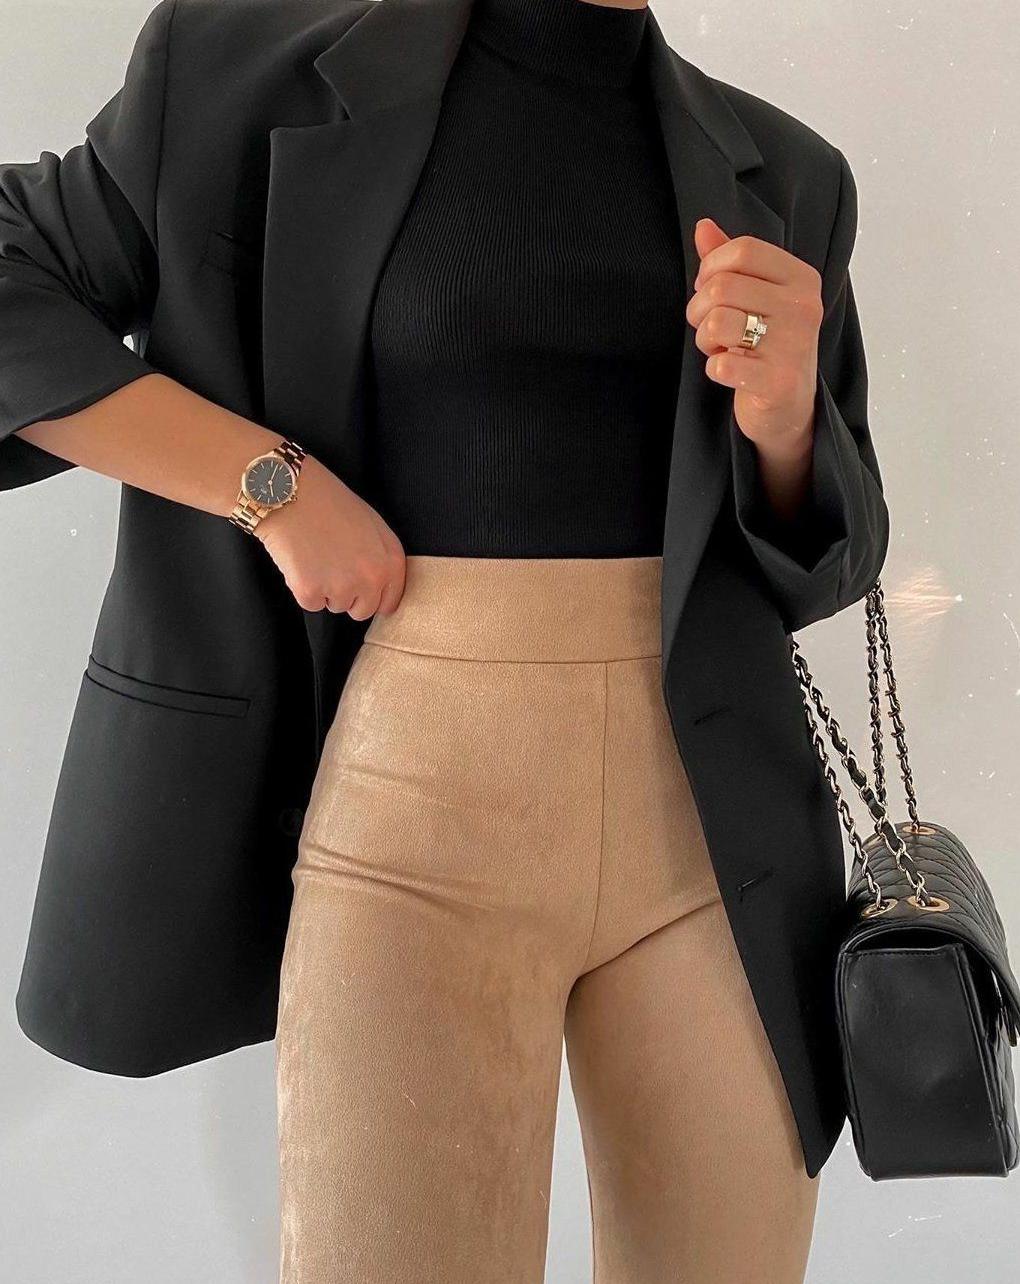 Blazer Trends For Women: One And Only Guide For You 2023